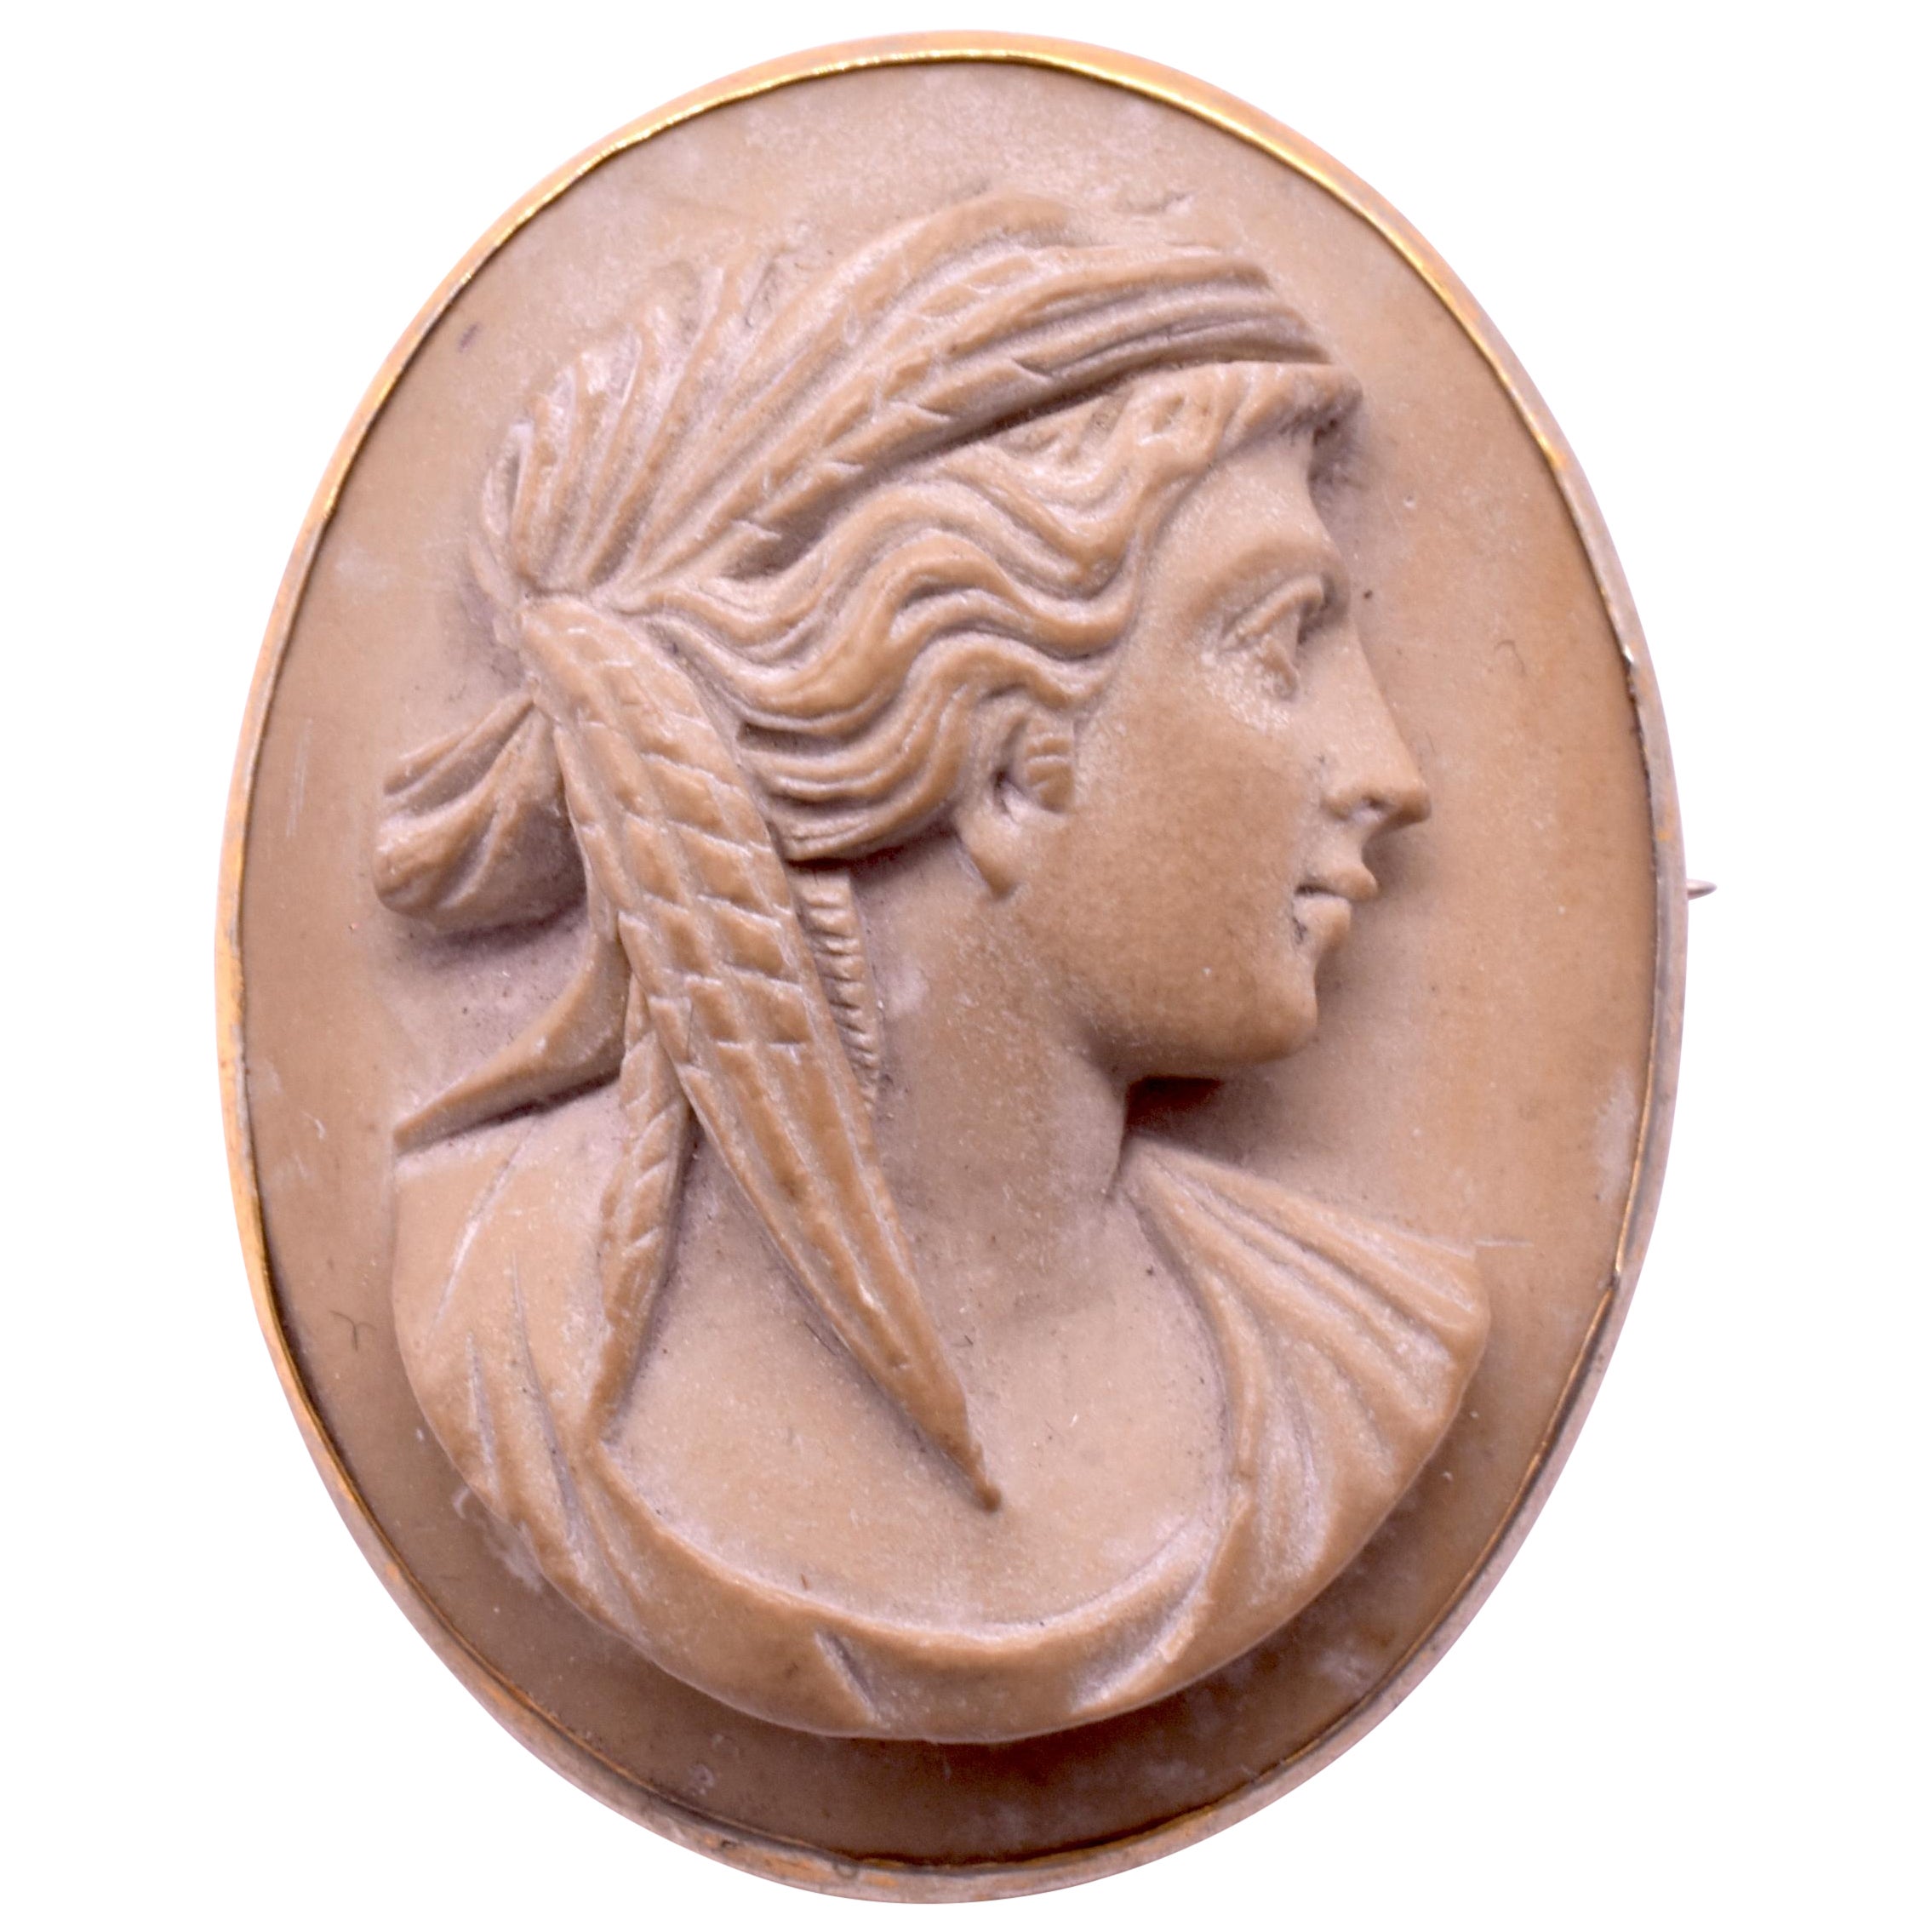 C1850 Lava Putty Cameo Brooch of Demeter, Goddess of Agriculture